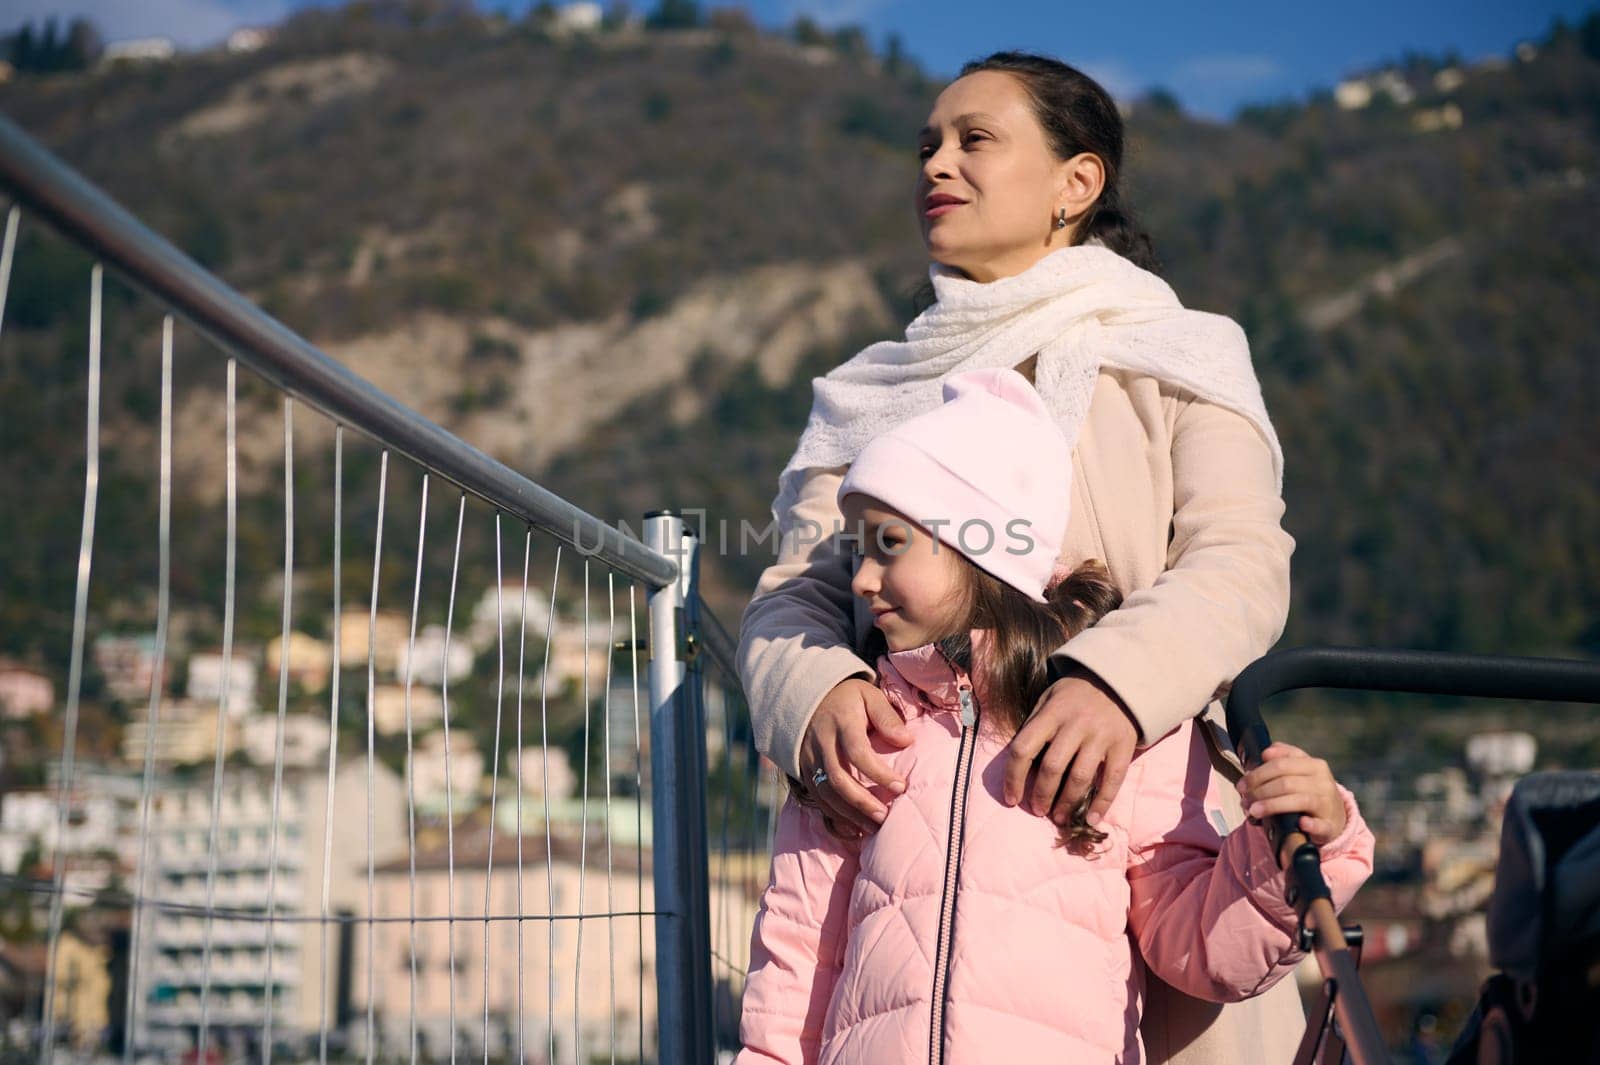 Beautiful smiling young woman and her little kid, cute daughter walking on the promenade near the lake of Como. Family relationships. Mother and children enjoying family walk outdoors by artgf